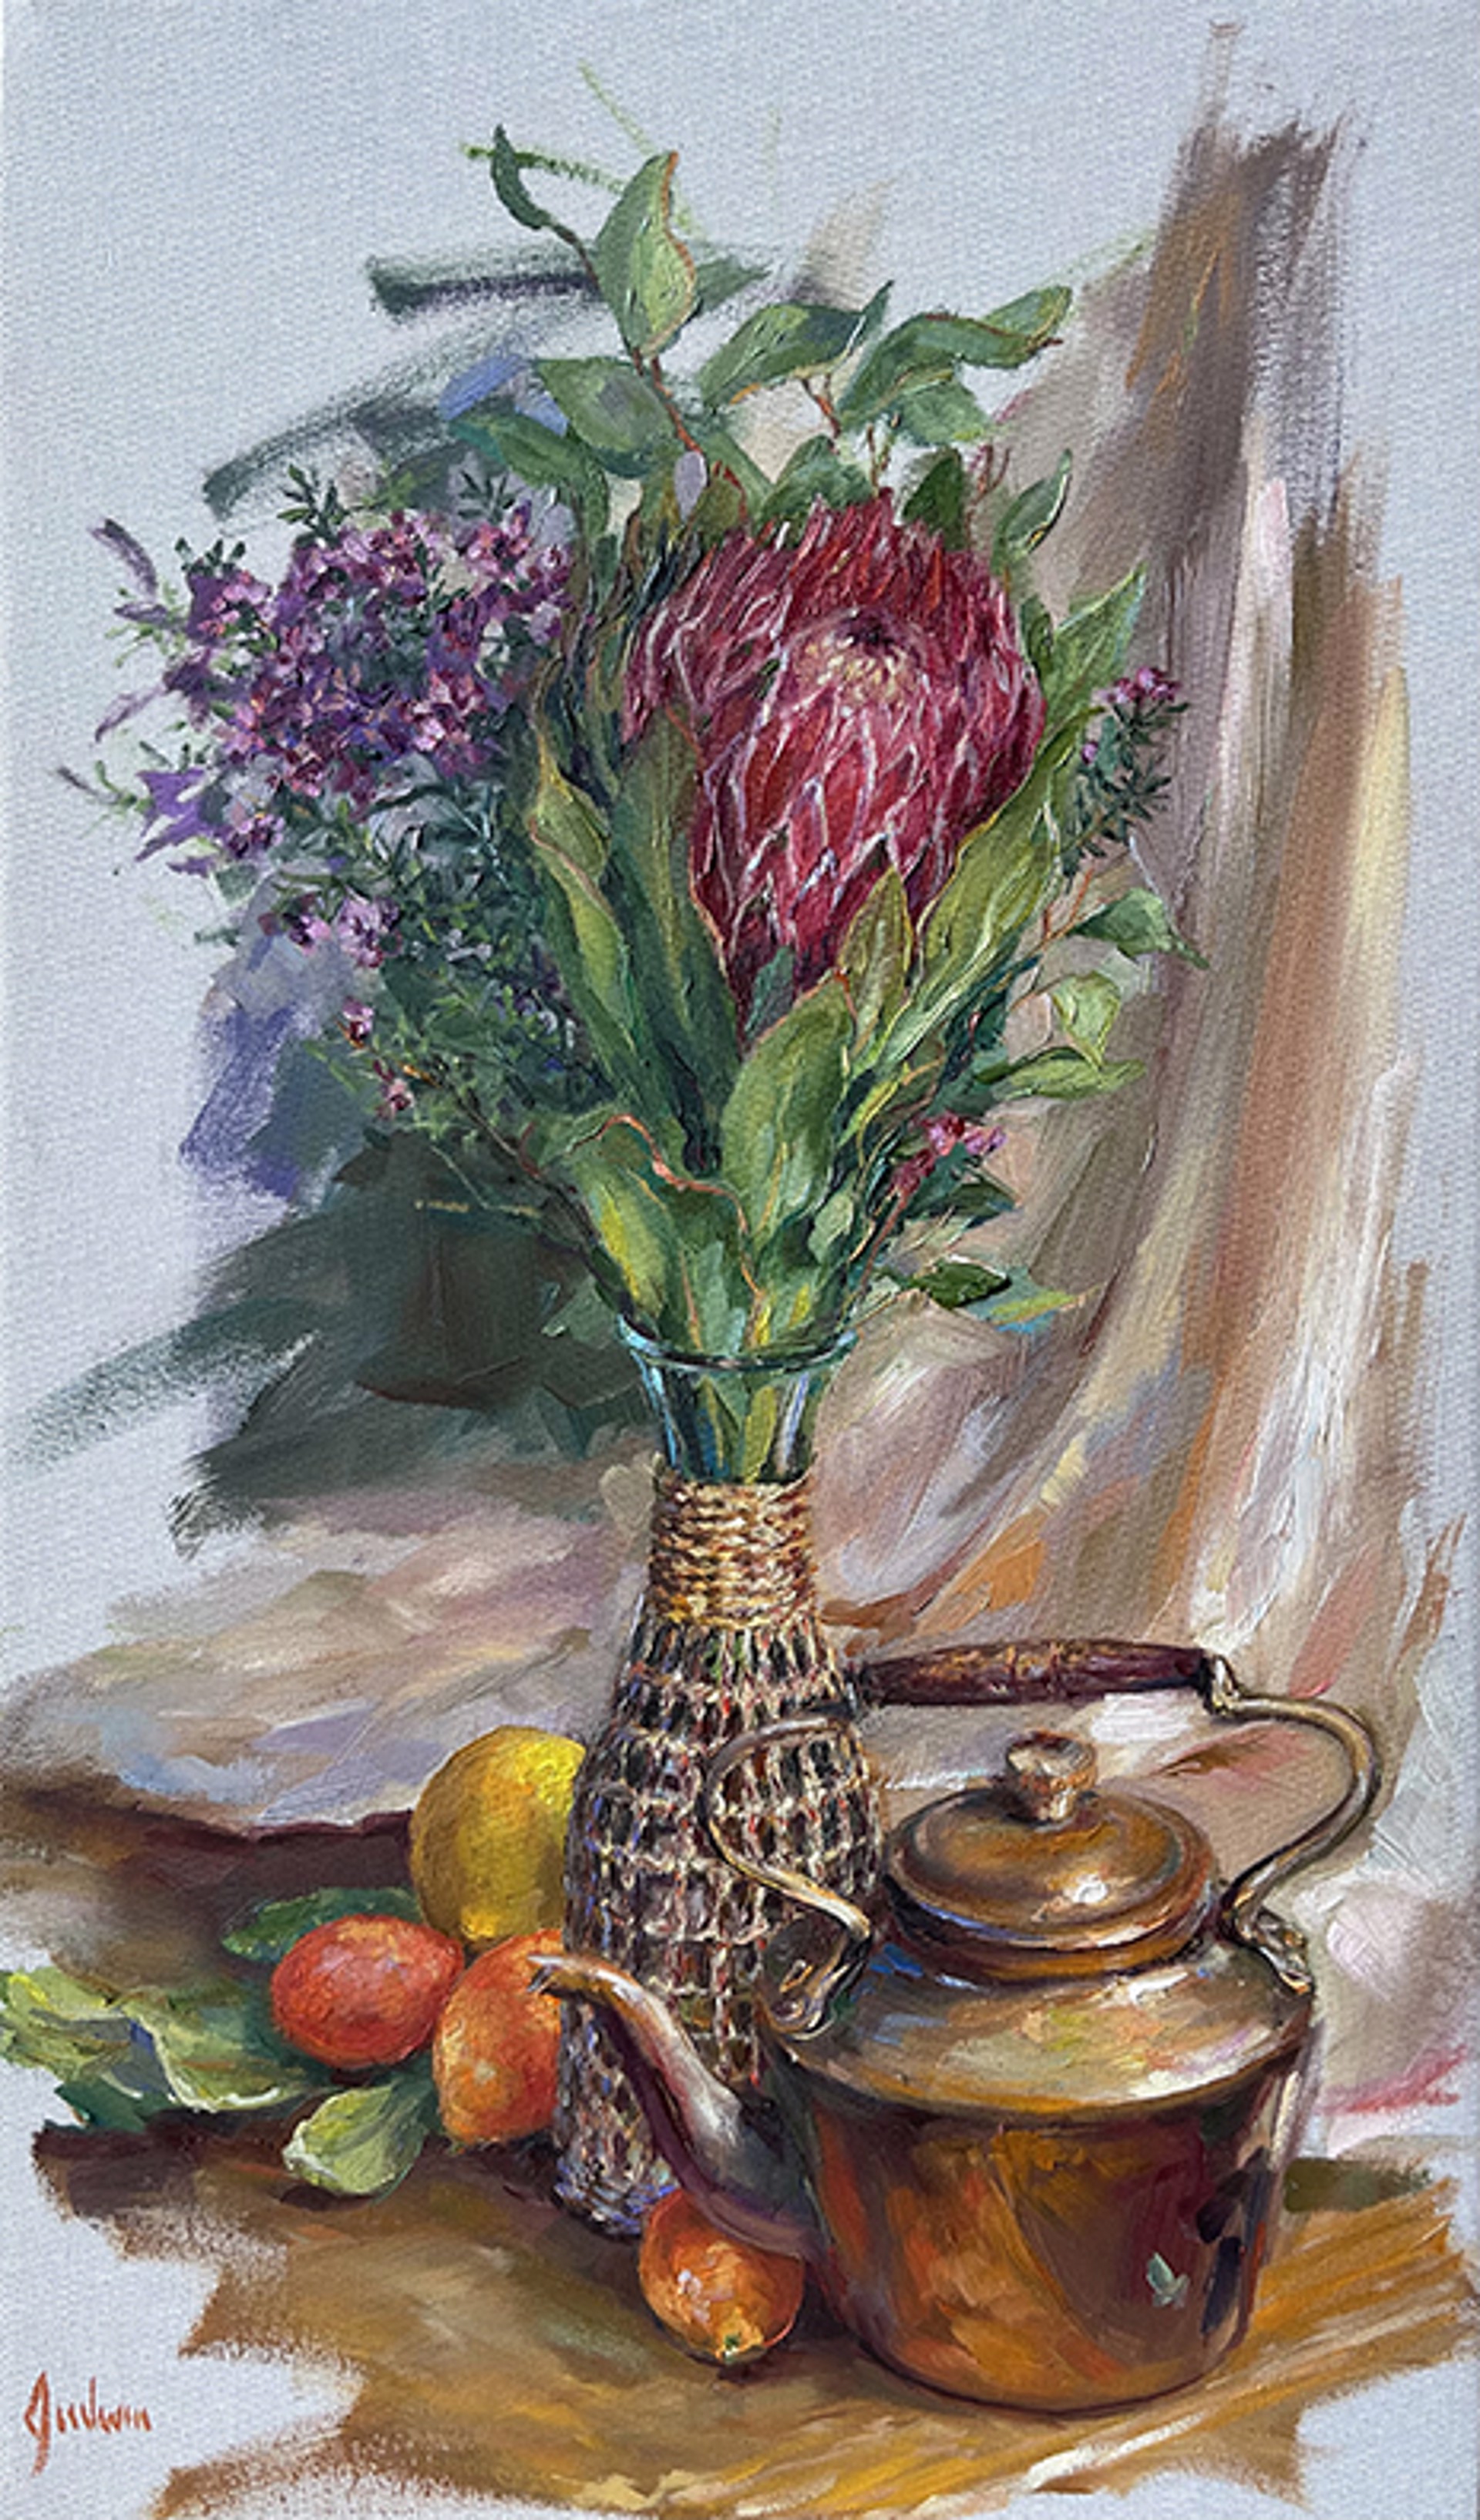 Get-well Bouquet and Tea Kettle in the Artist's Studio by Lindsay Goodwin